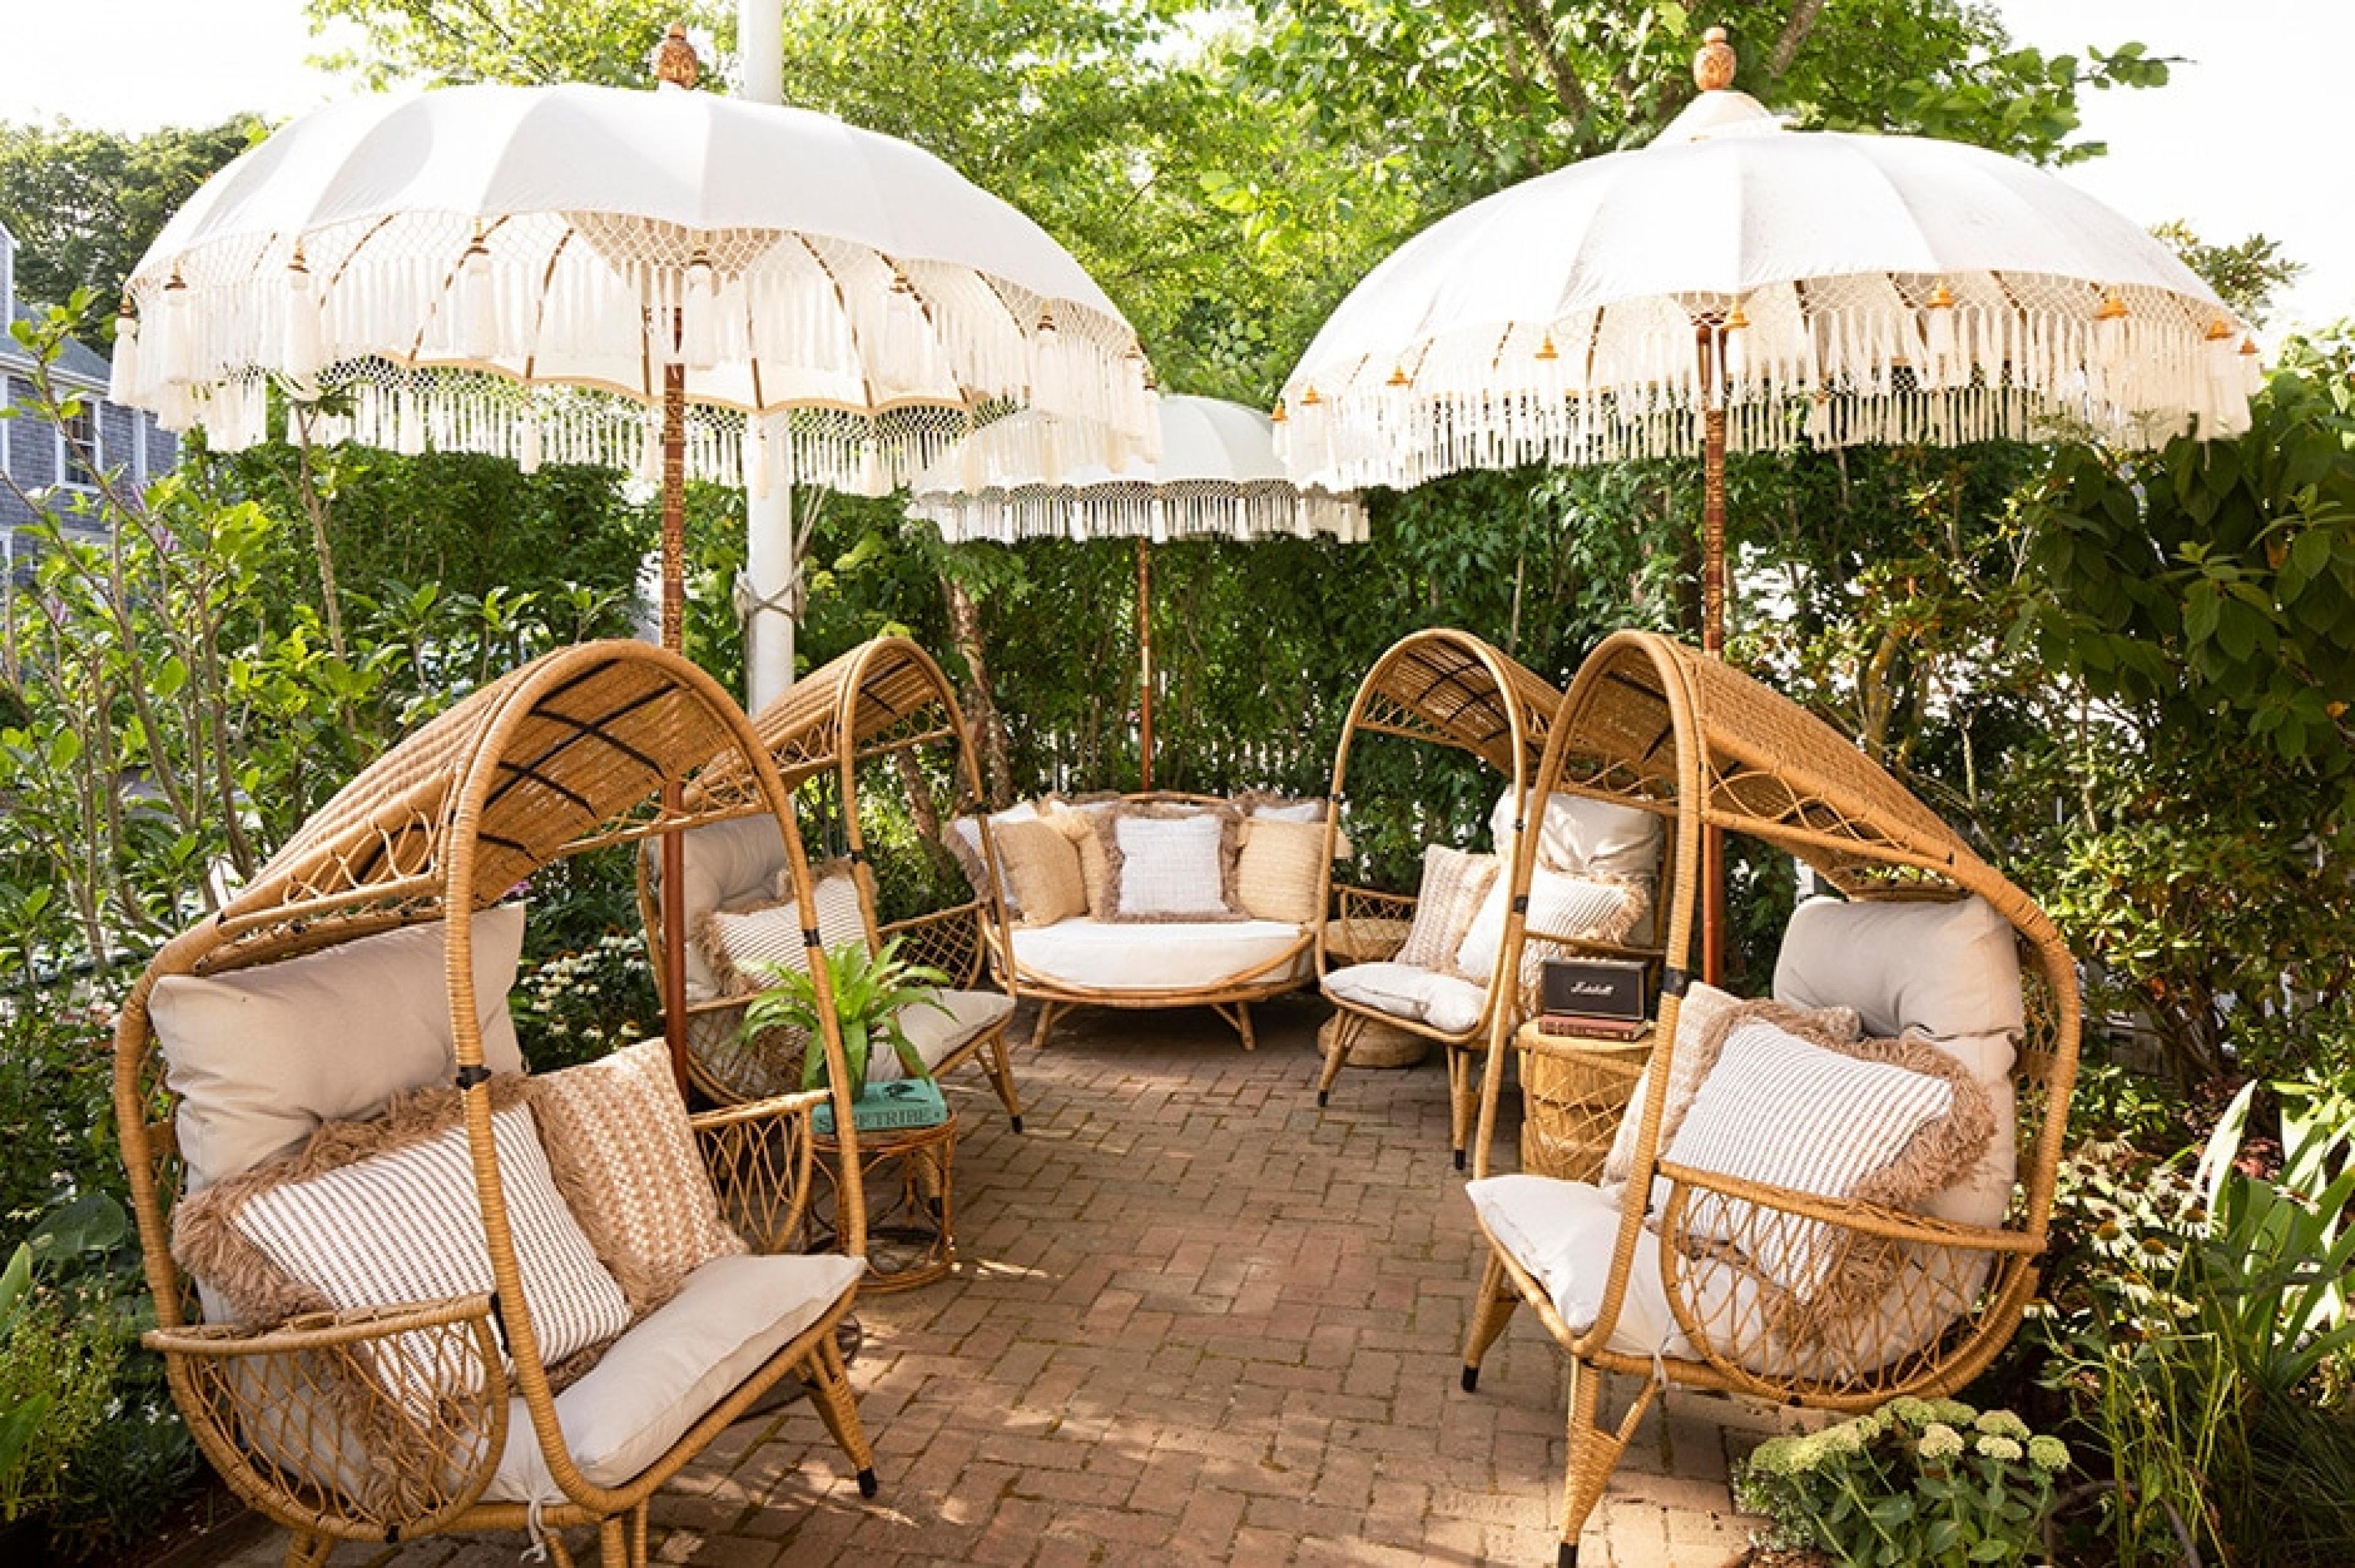 sets of rattan chairs and tassled sun umbrellas outside in a garden